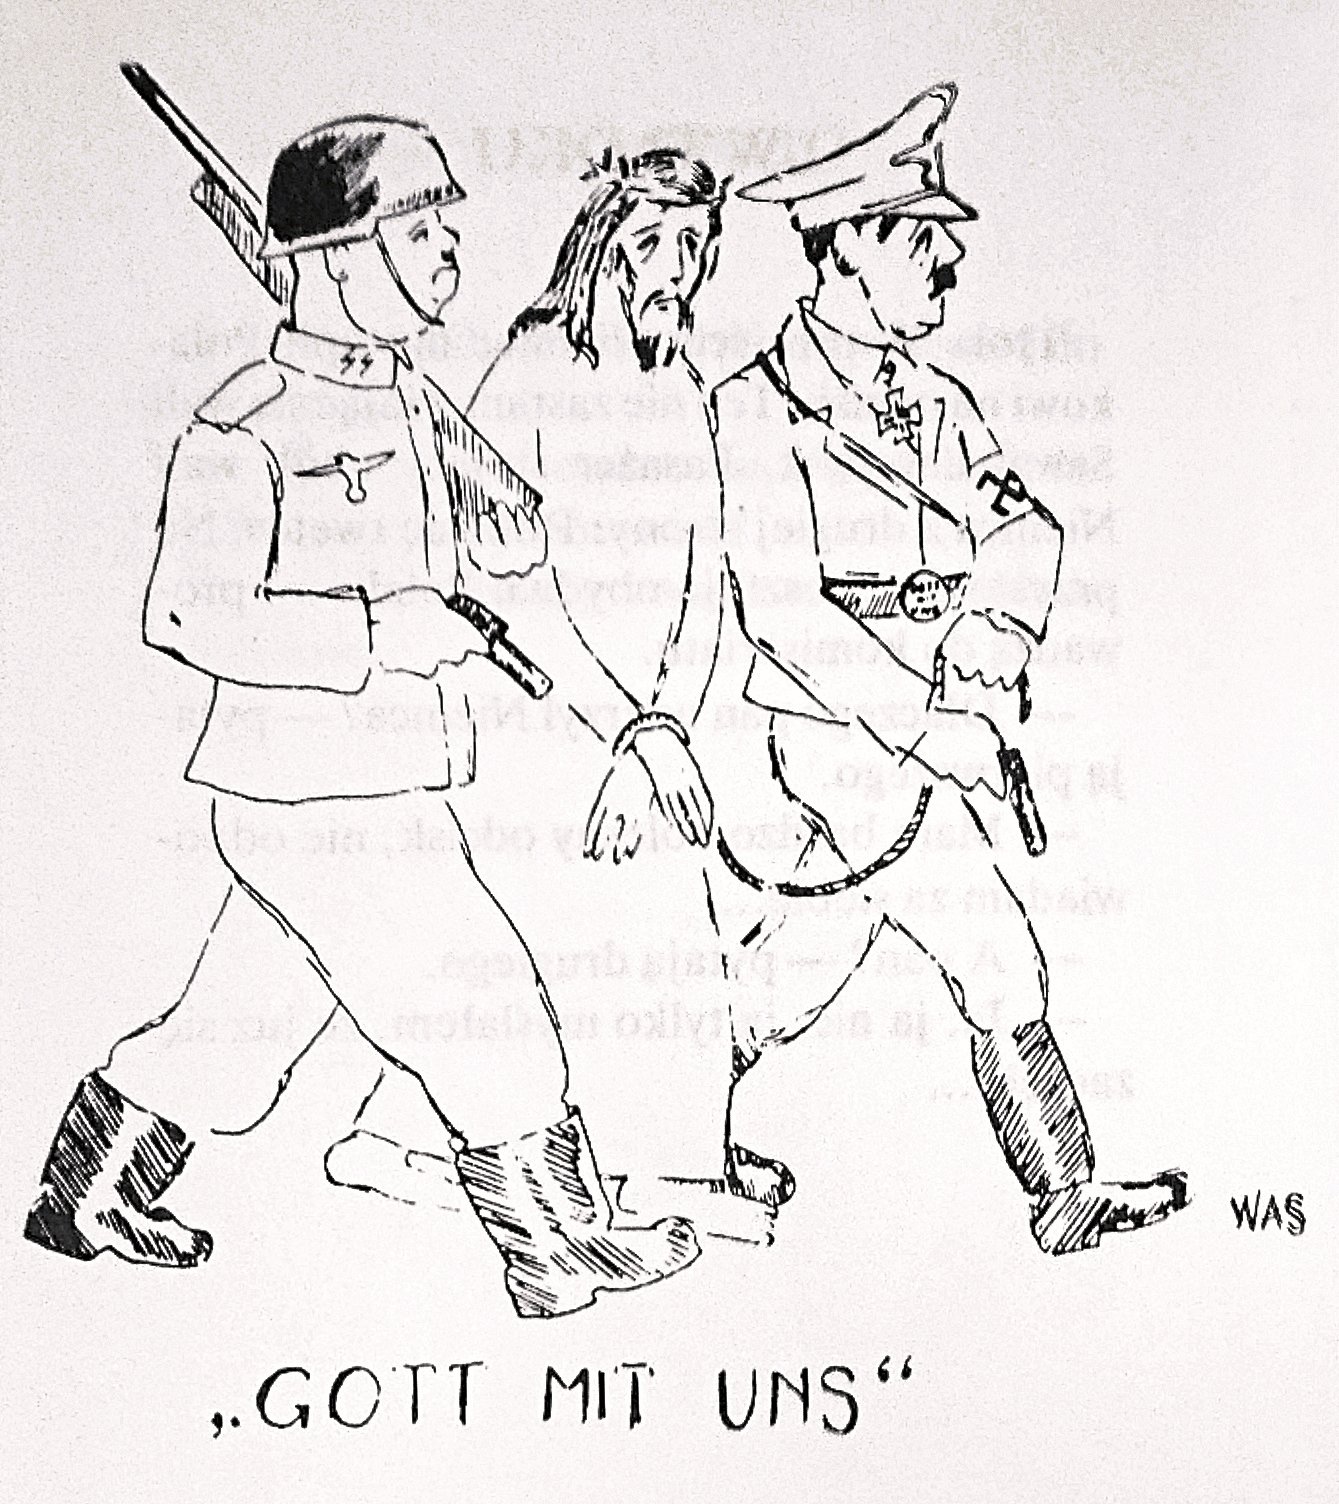 GOD WITH US - a cartoon printed in 1943's occupied Poland, in an illegal underground magazine, published by resistance groups.jpg